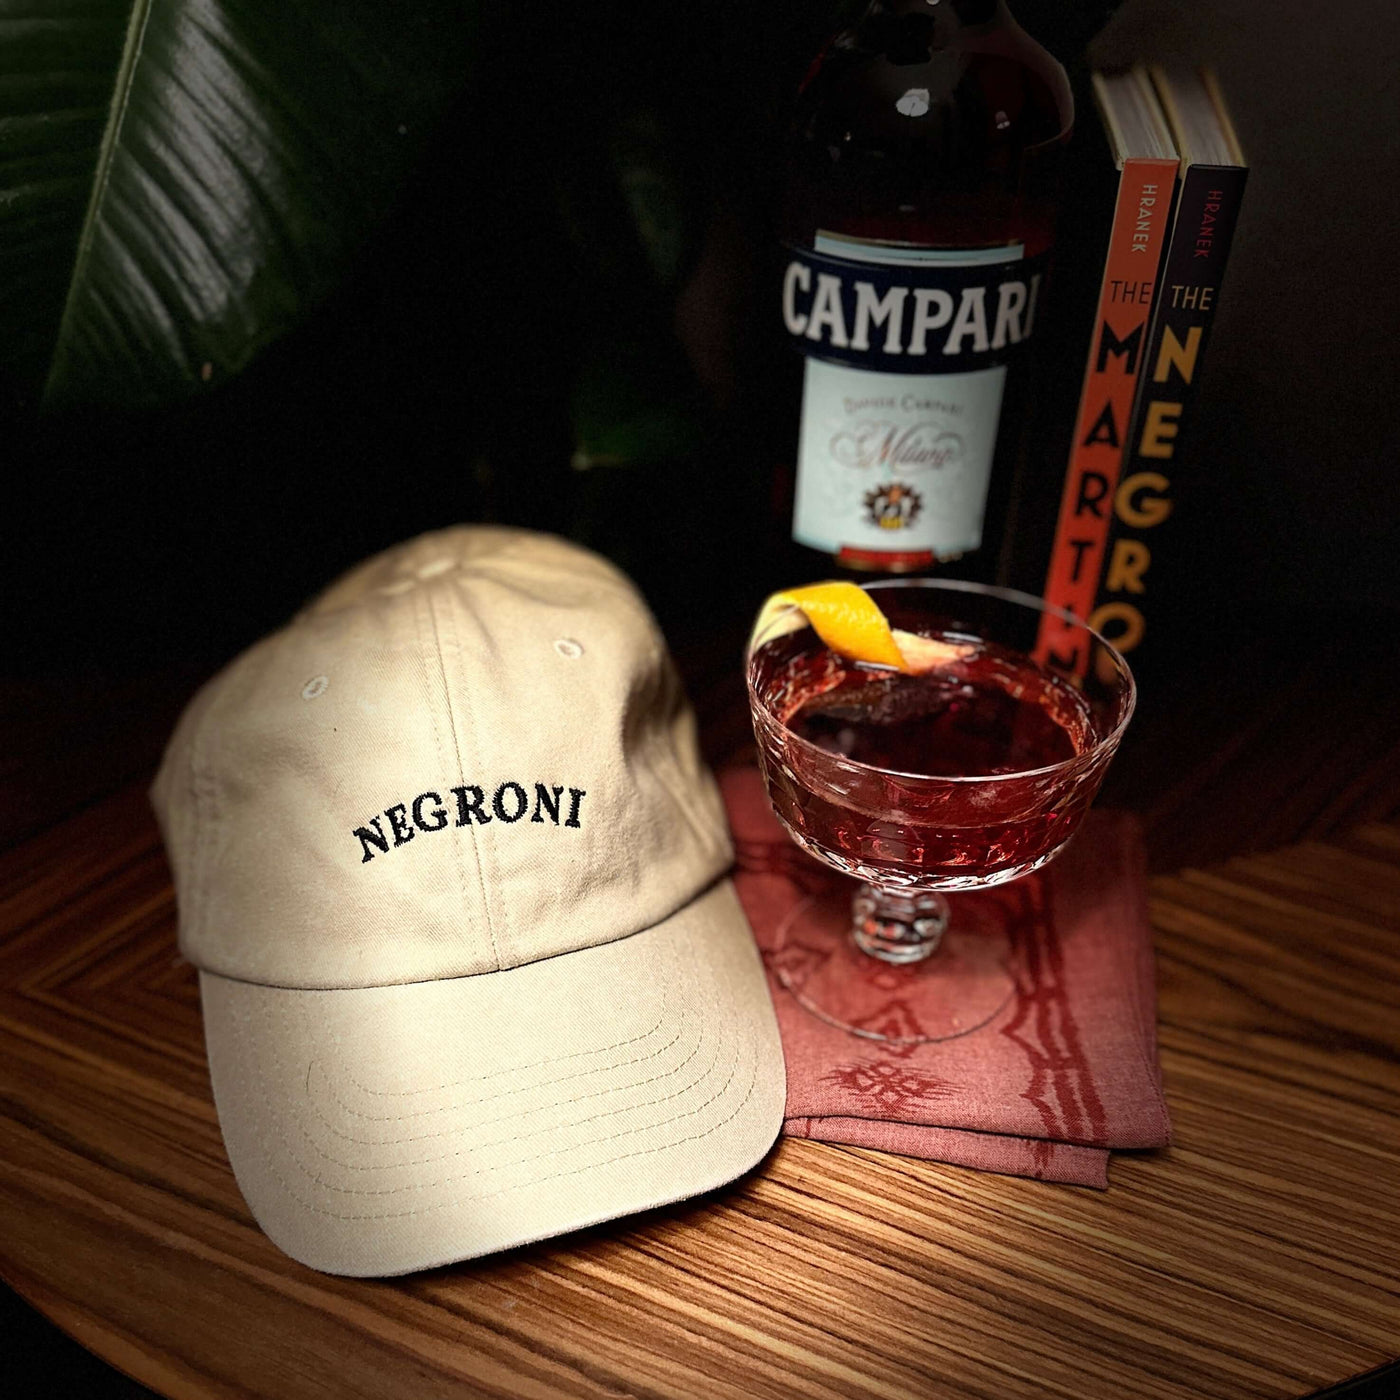 Negroni - Embroidered Vintage Cap